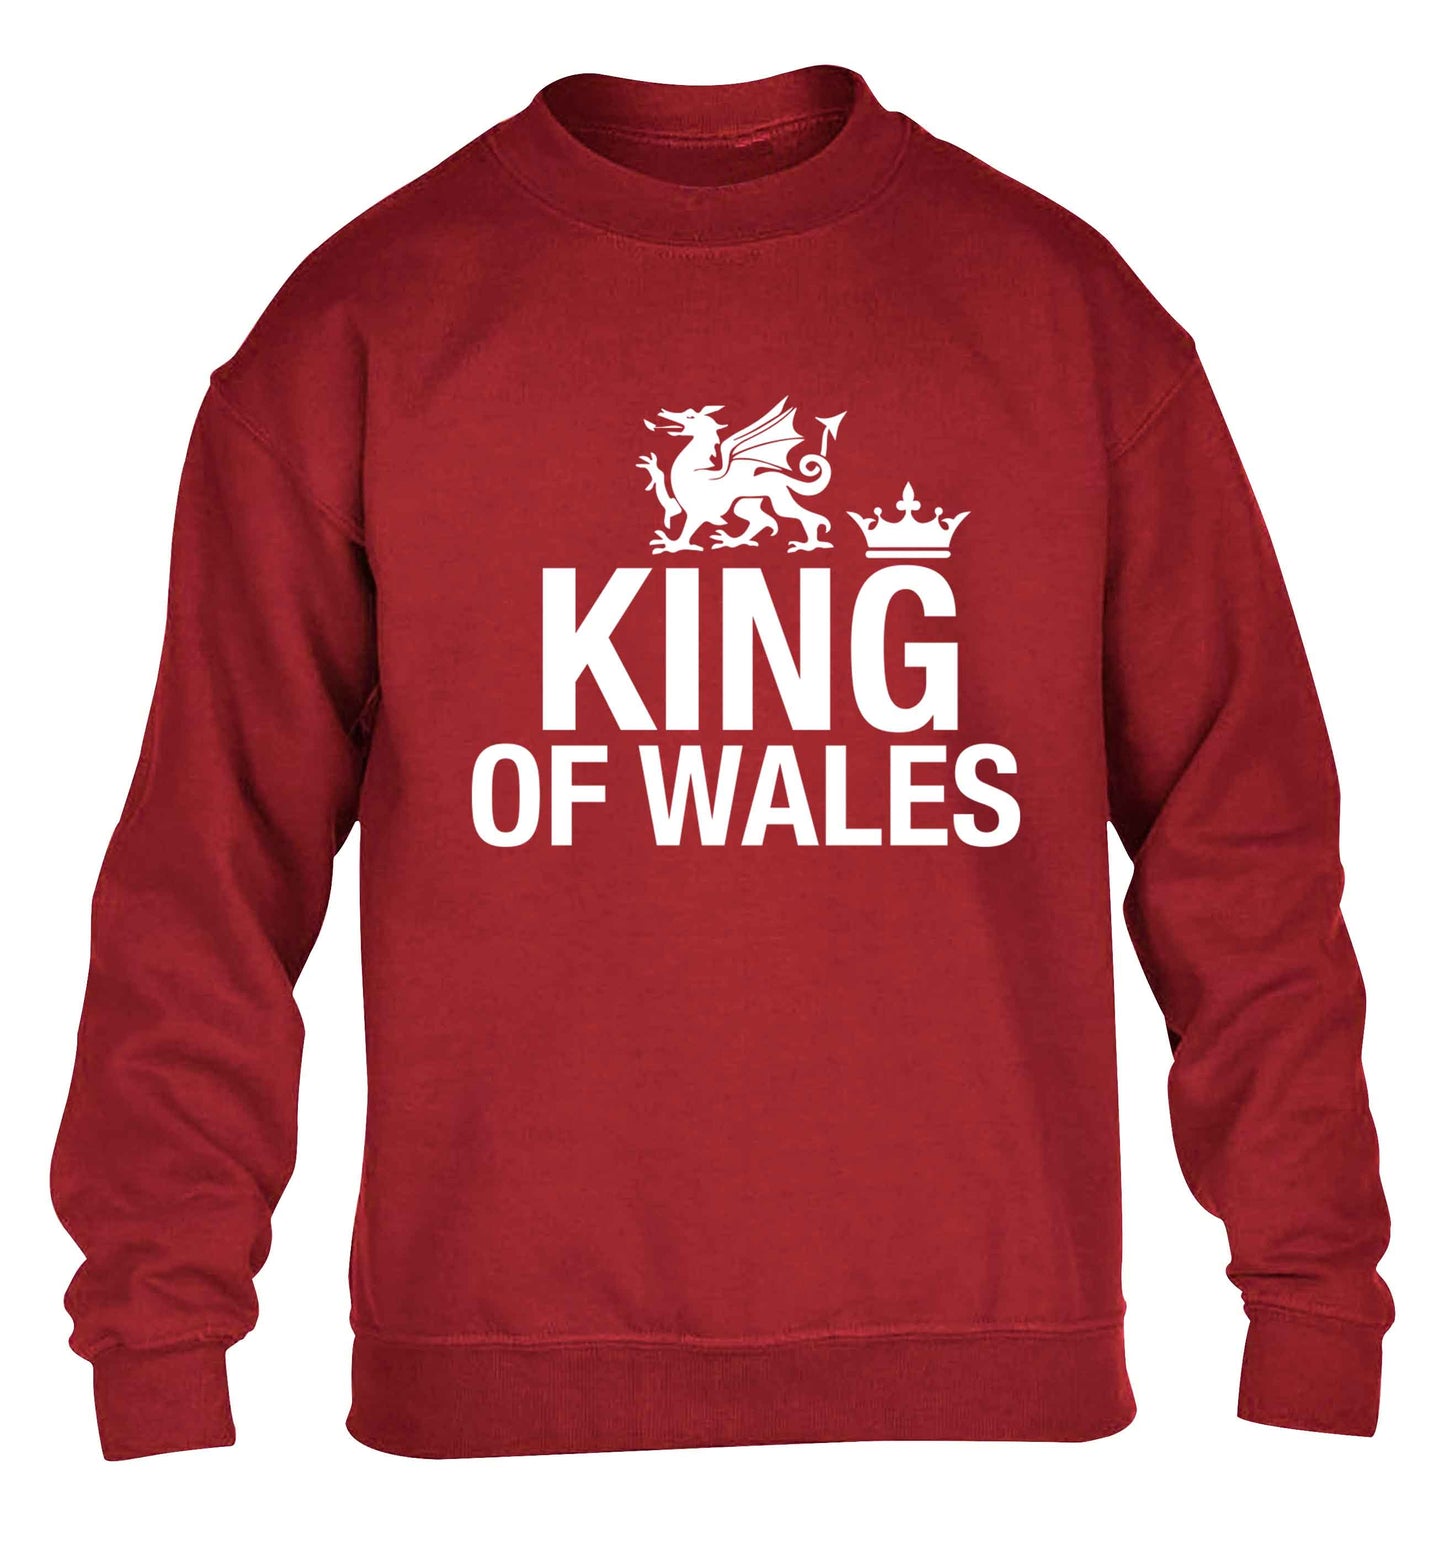 King of Wales children's grey sweater 12-13 Years